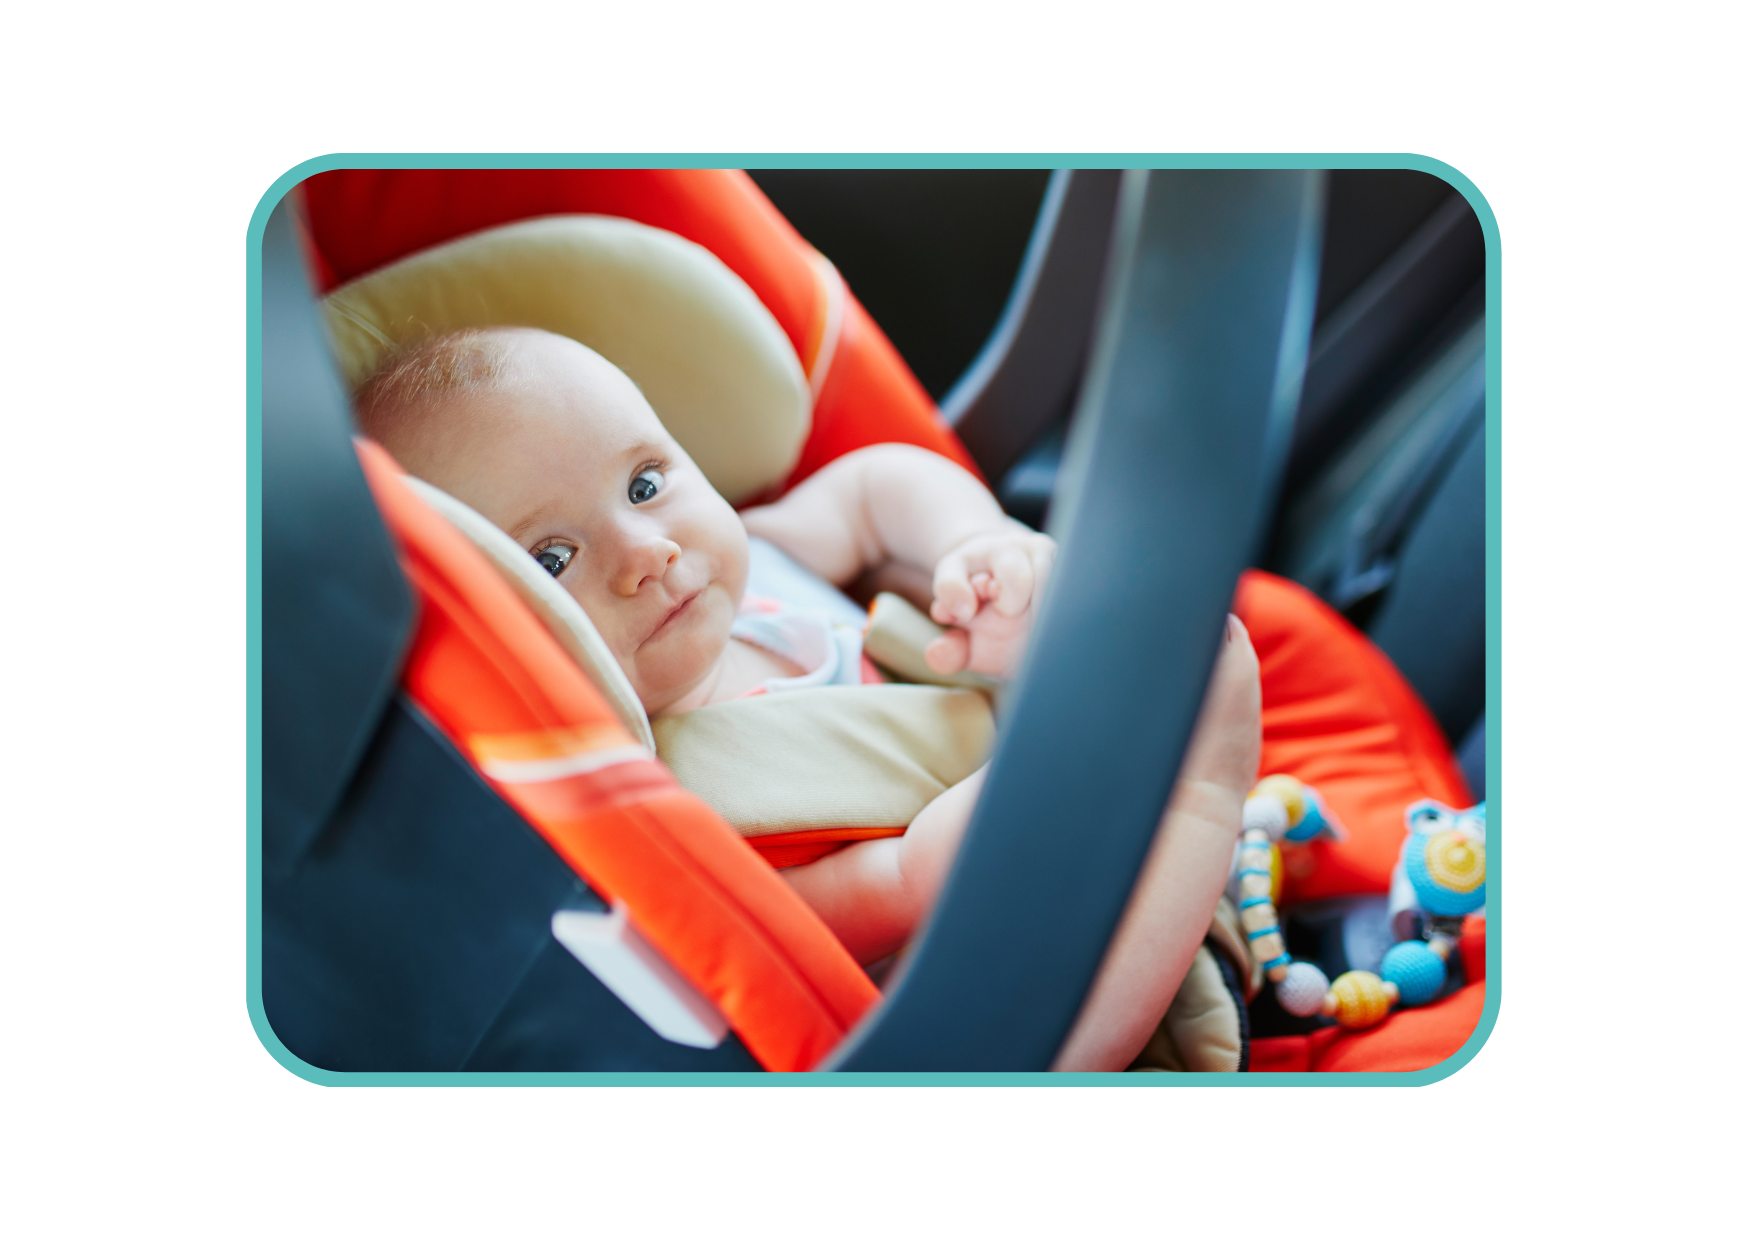 baby sitting in a baby car seat with an orange cover